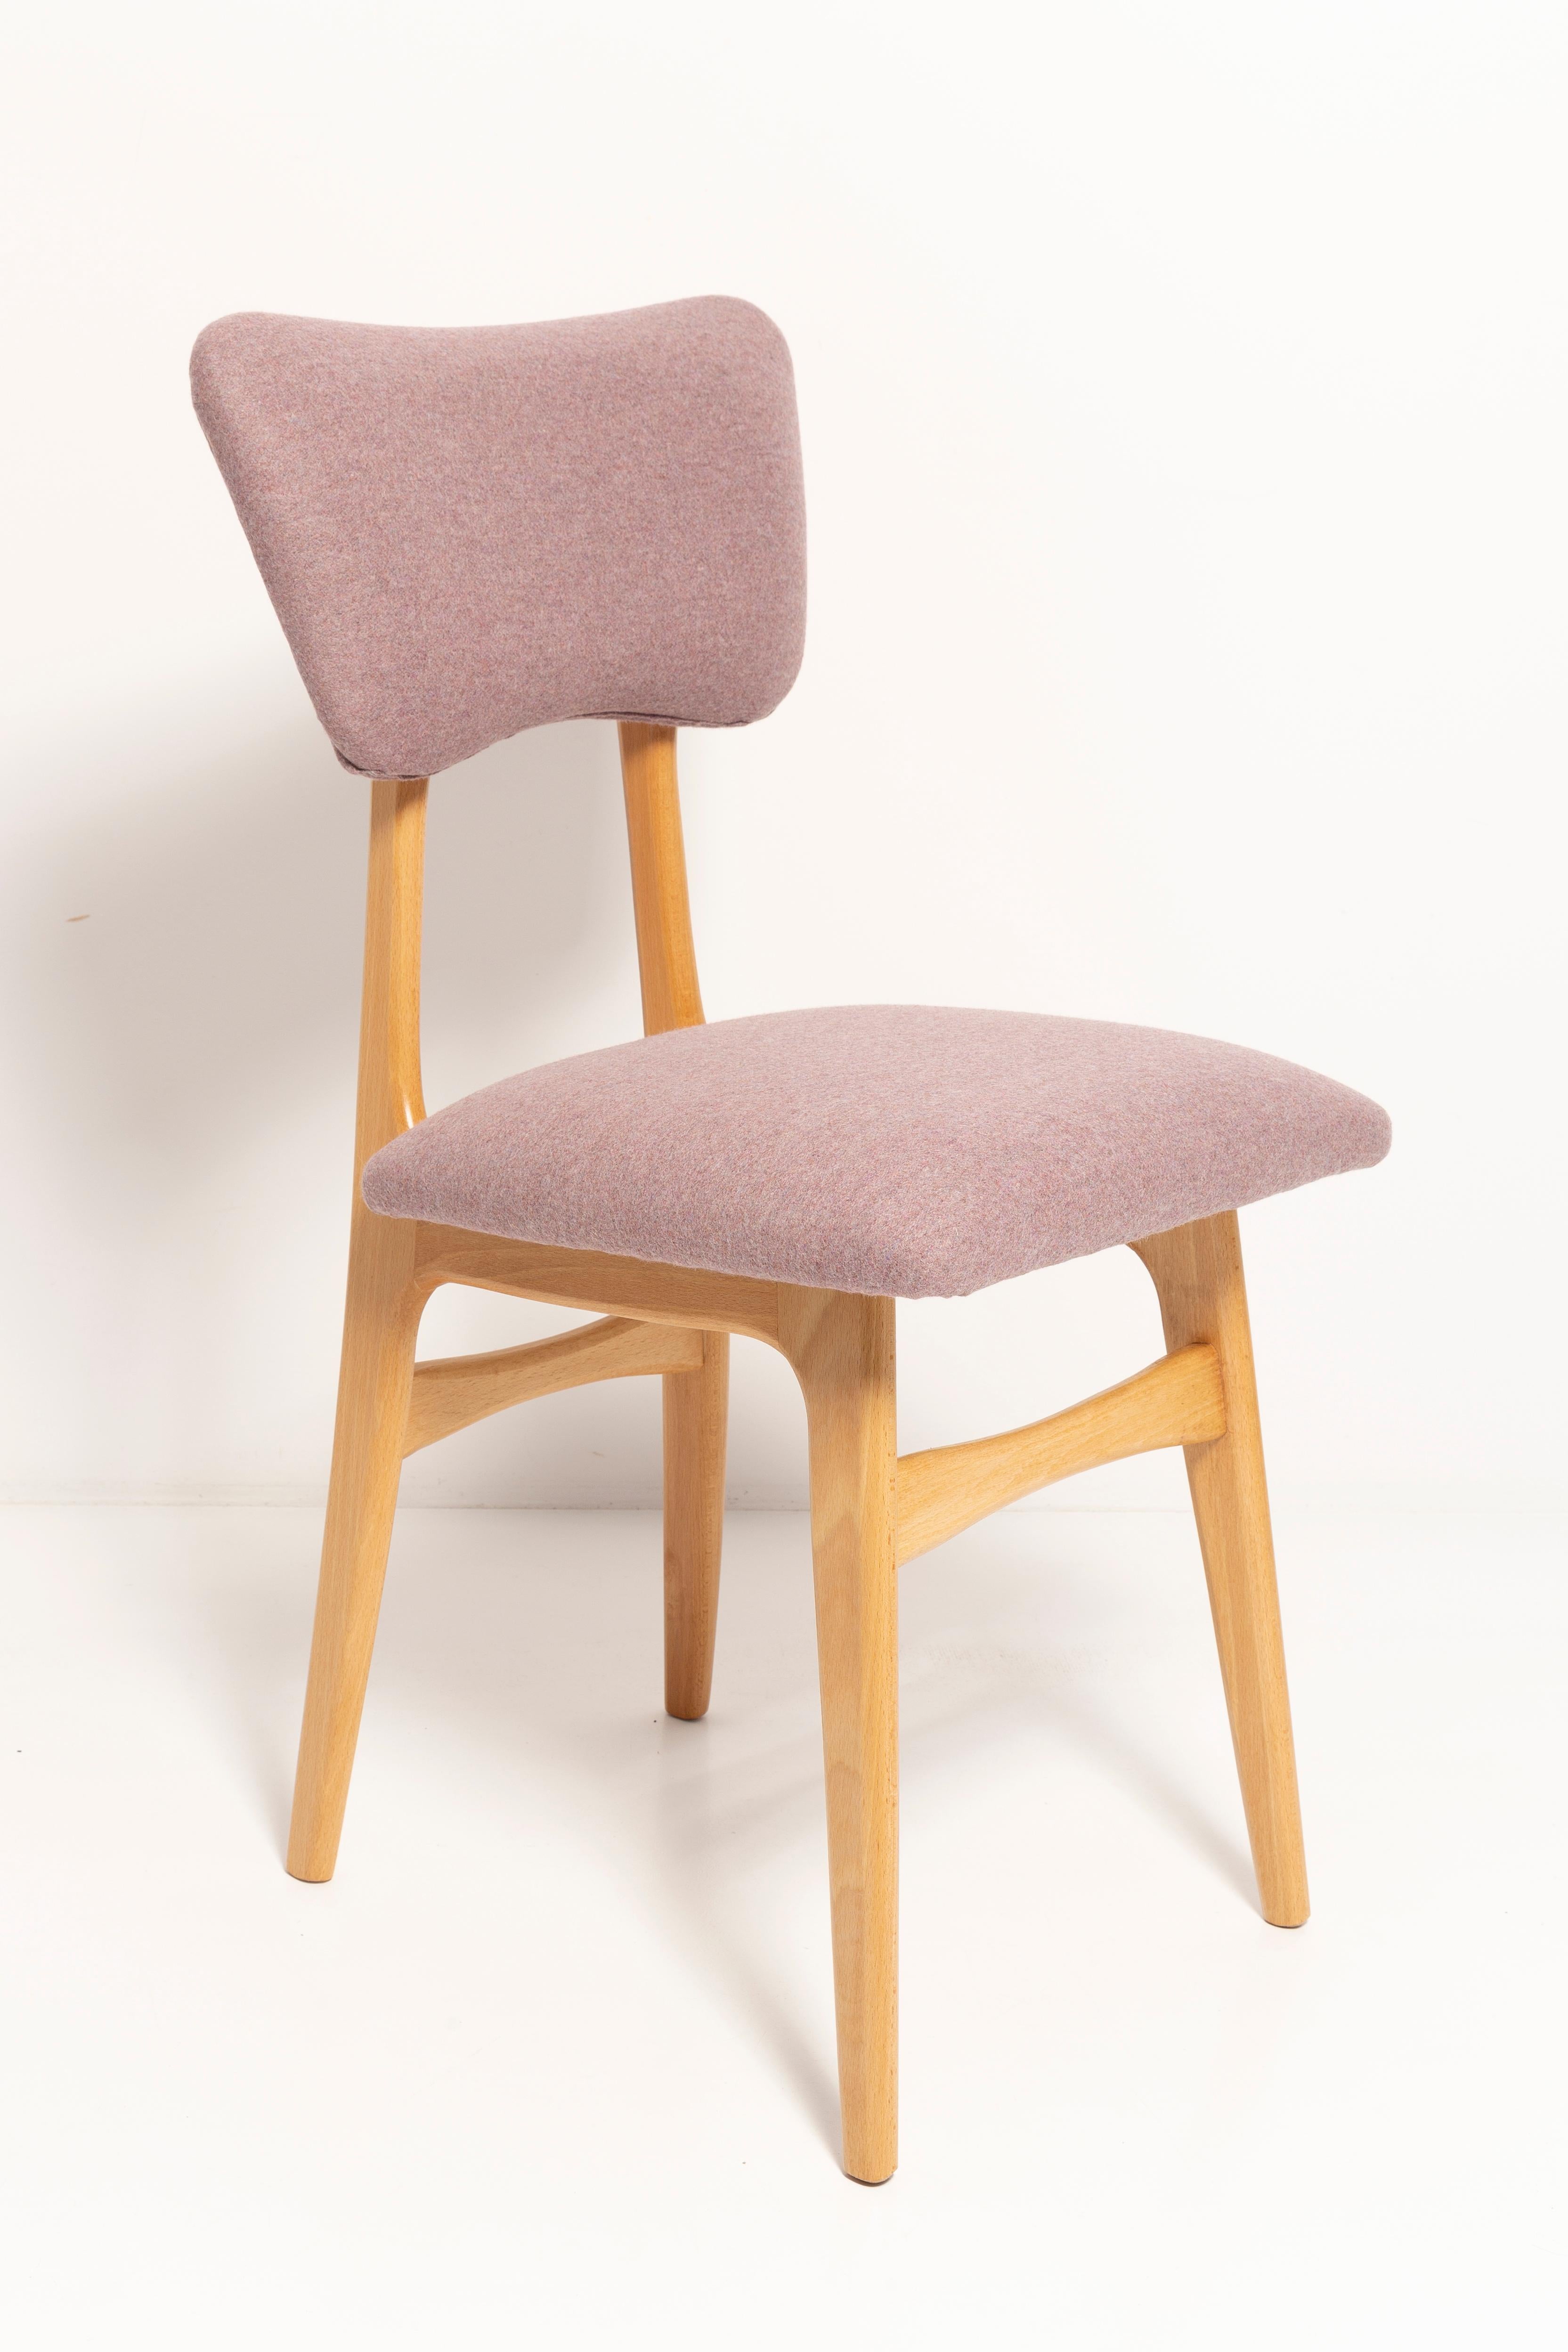 Polish Nine 20th Century Butterfly Dining Chairs, Pink Wool, Light Wood, Europe, 1960s For Sale